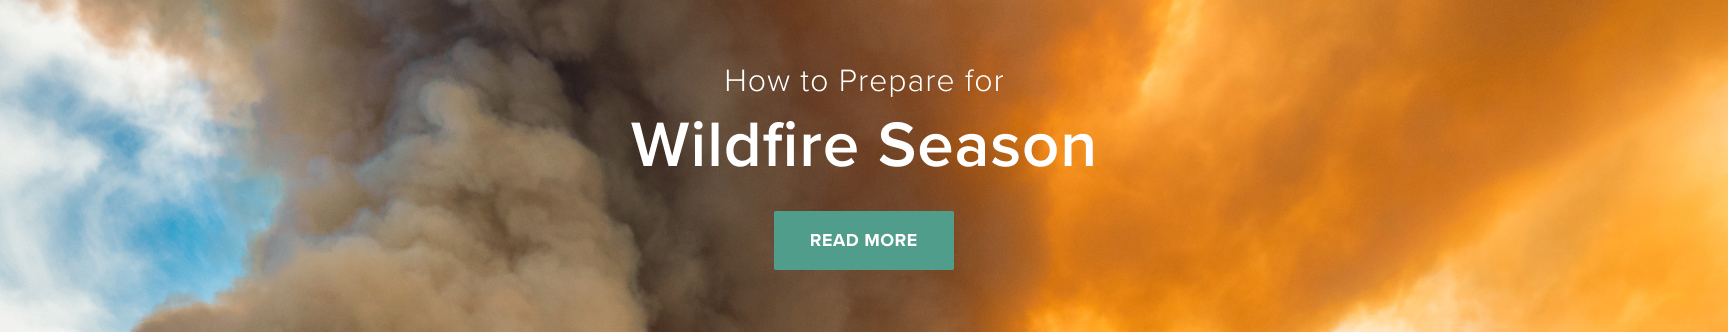 How to Prepare for Wildfire Season